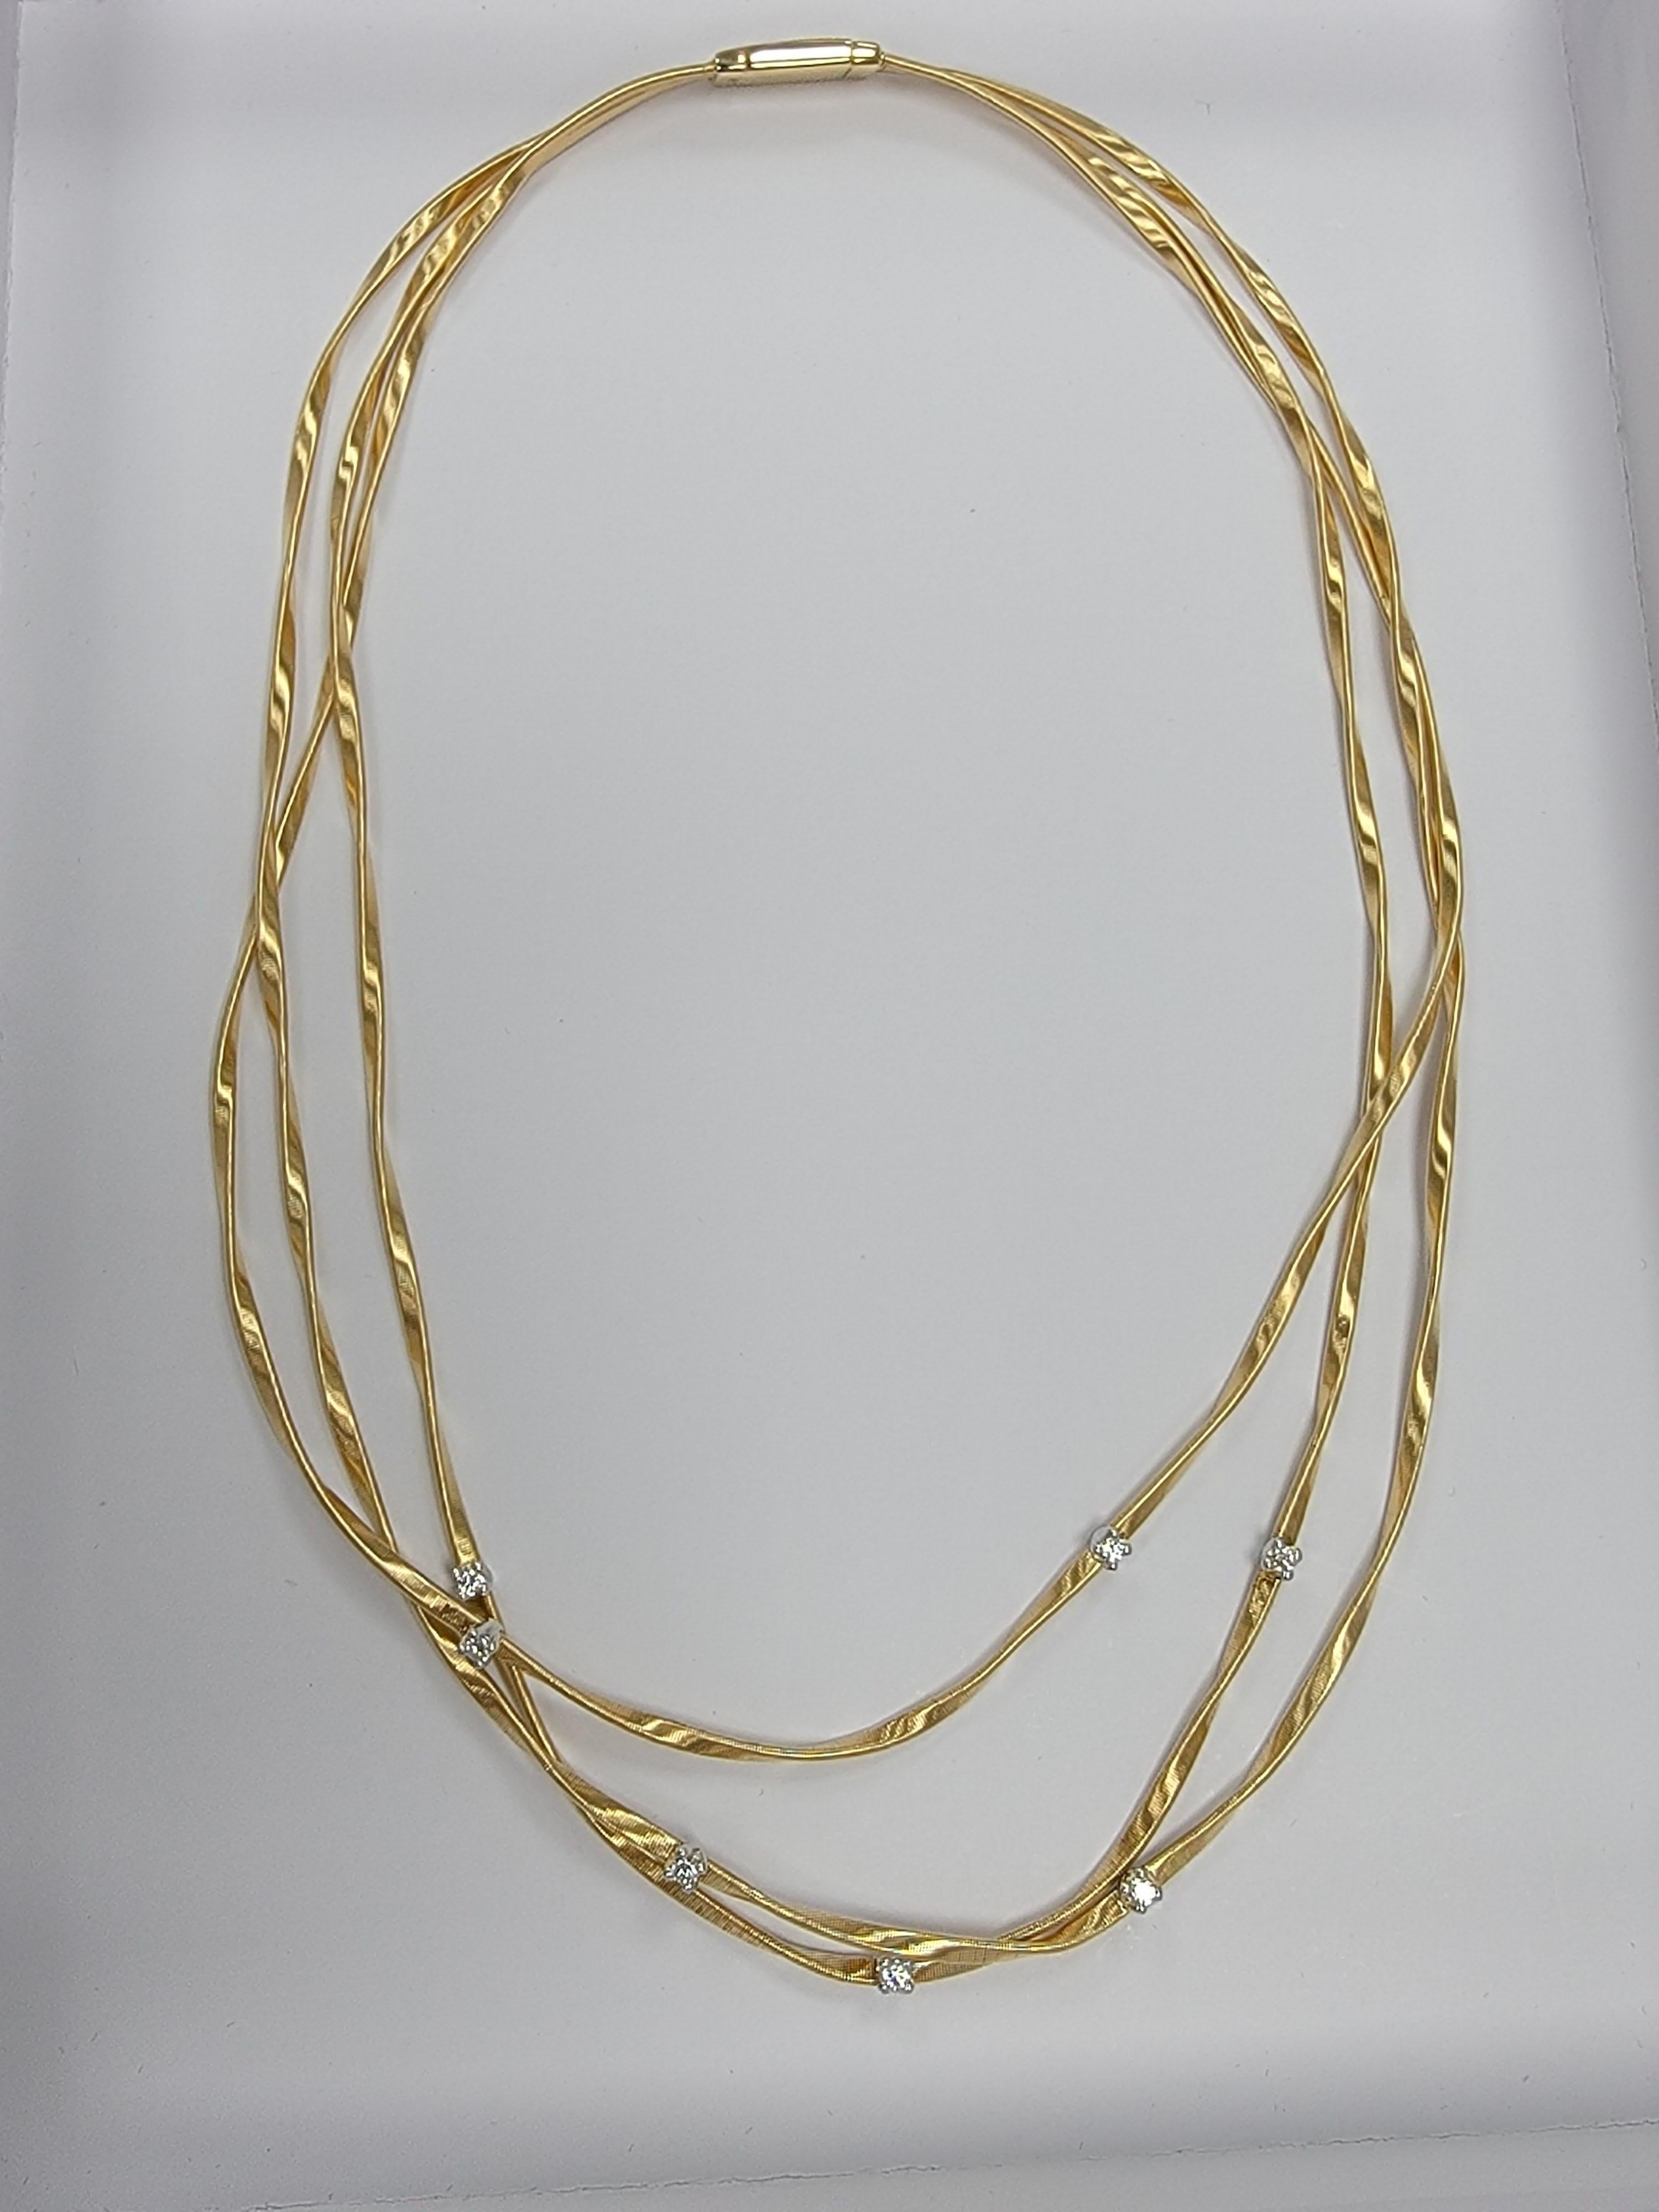 18K yellow gold three strand necklace with brilliant cut diamonds. This Marrakech Diamond Necklace is formed from hand hammered and hand twisted strands of gold created through Marco's signature 'corda di chitarra' technique. Total diamond weight: